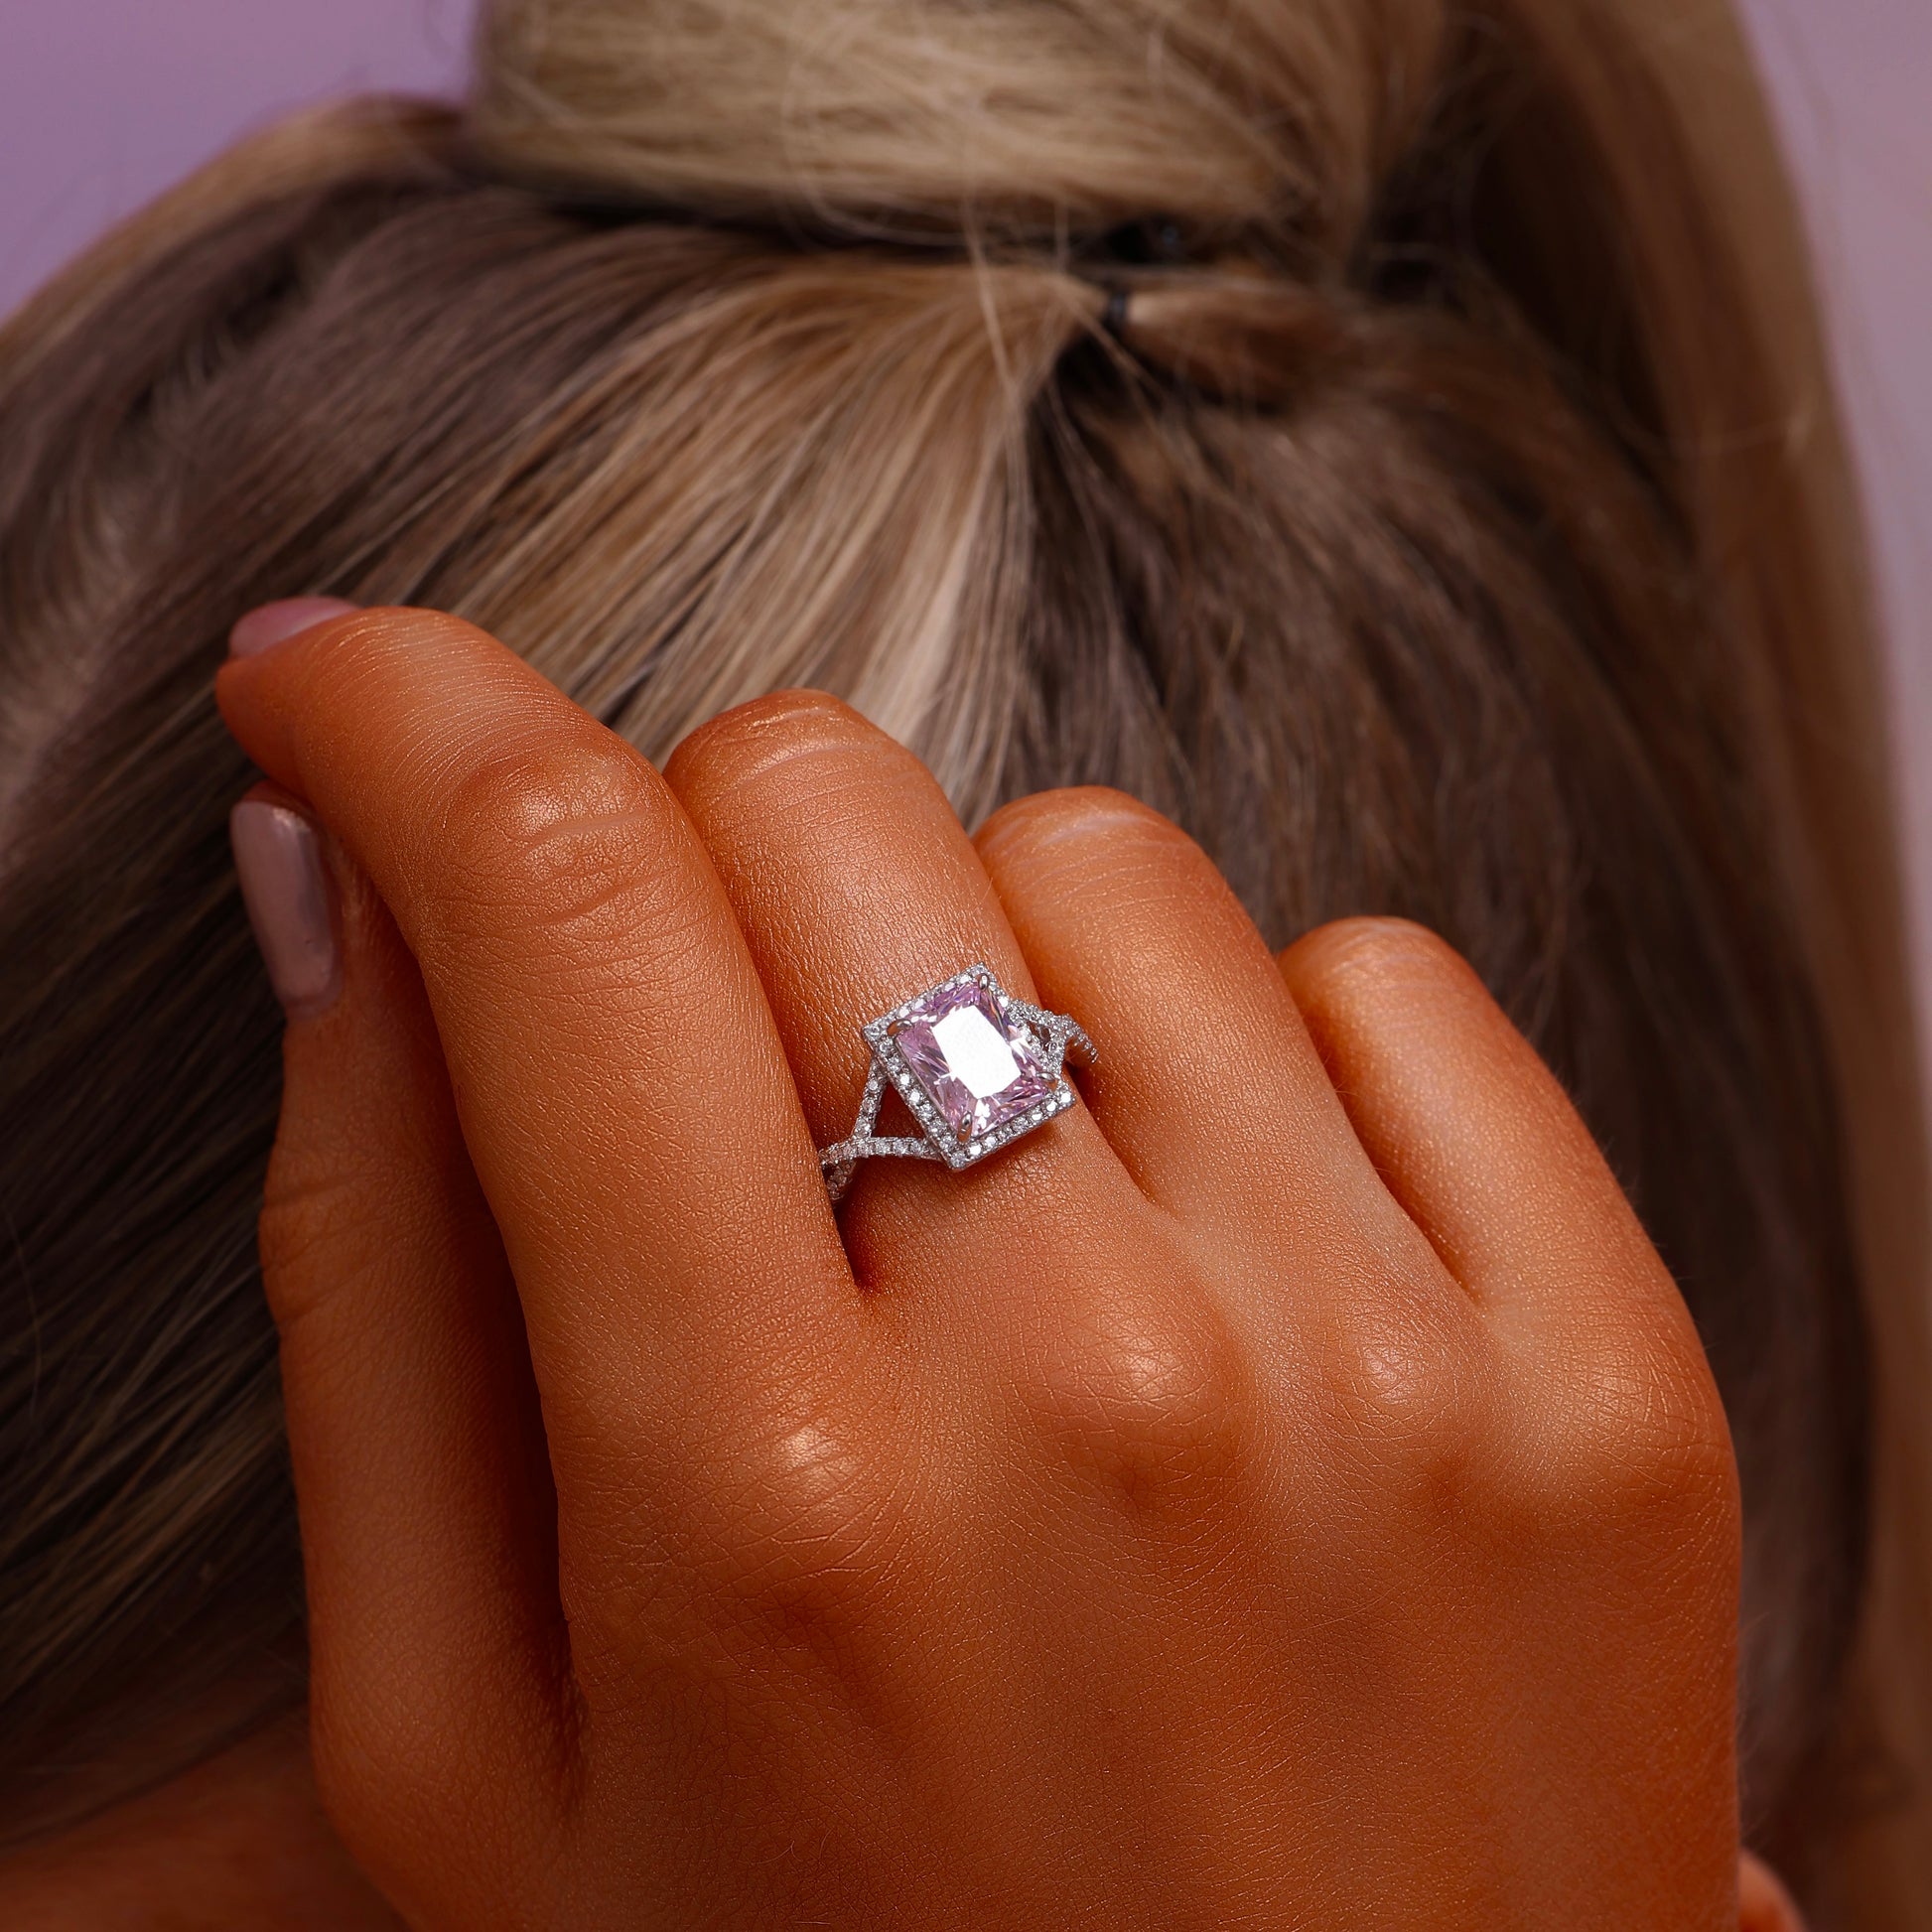 Halo Radiant Cut High Carbon Diamond Pavé Ring - Rhodium Plated Sterling Silver - Pink - Ring - ONNNIII